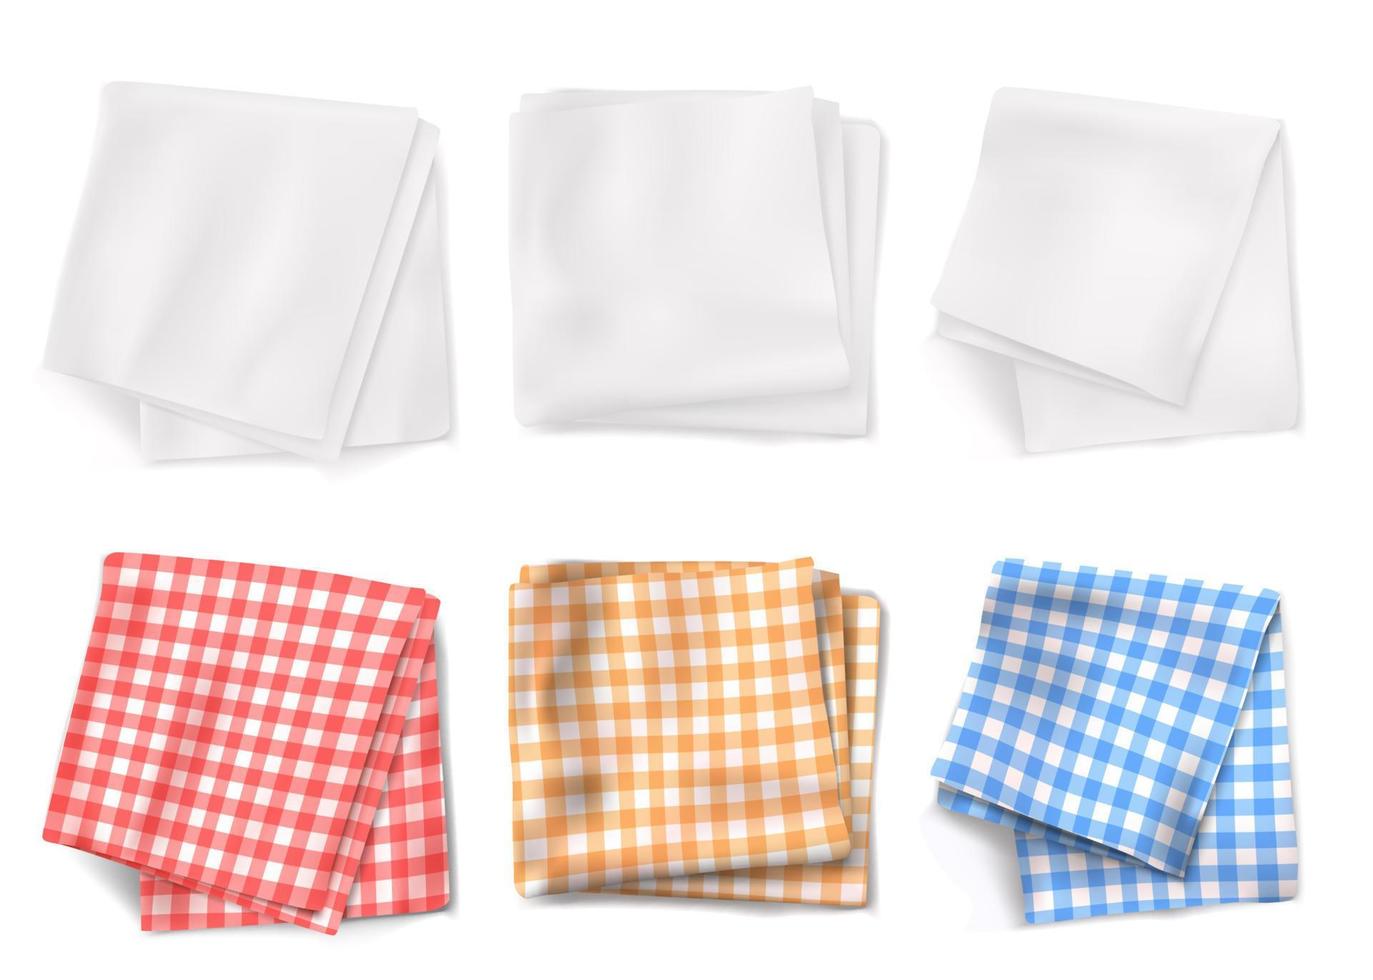 Gingham tablecloths and white kitchen towels vector